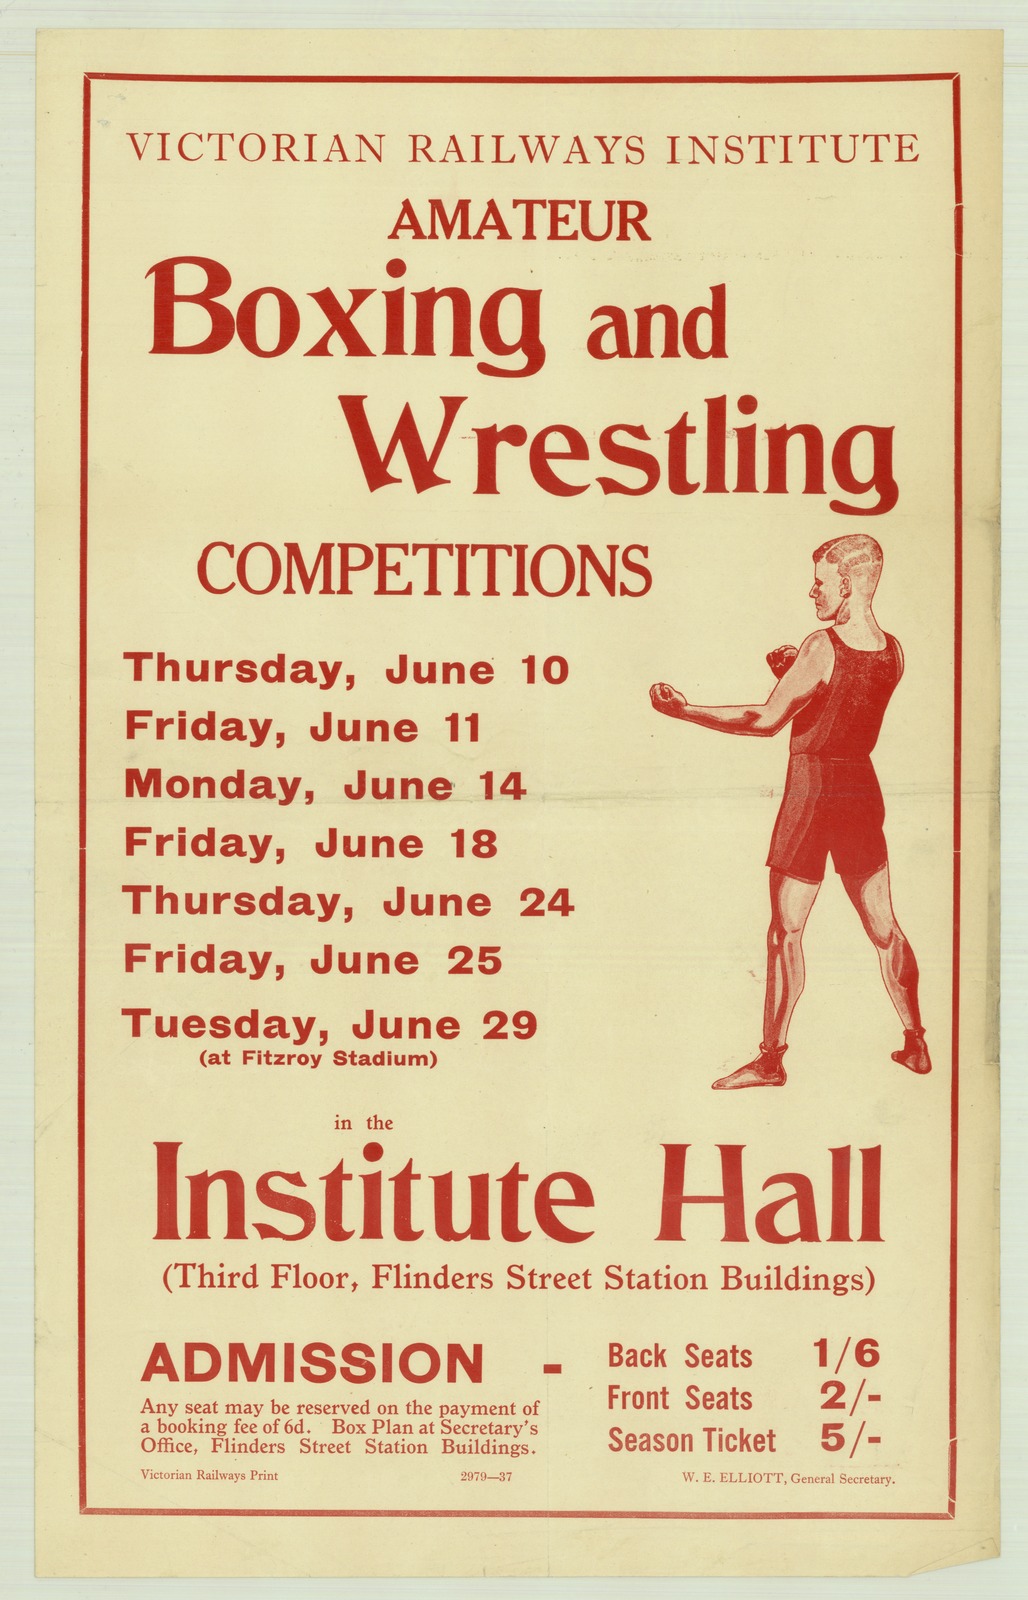 Victorian Railways Institute amateur boxing and wrestling competitions. Credit: Victorian Railways via State Library Victoria